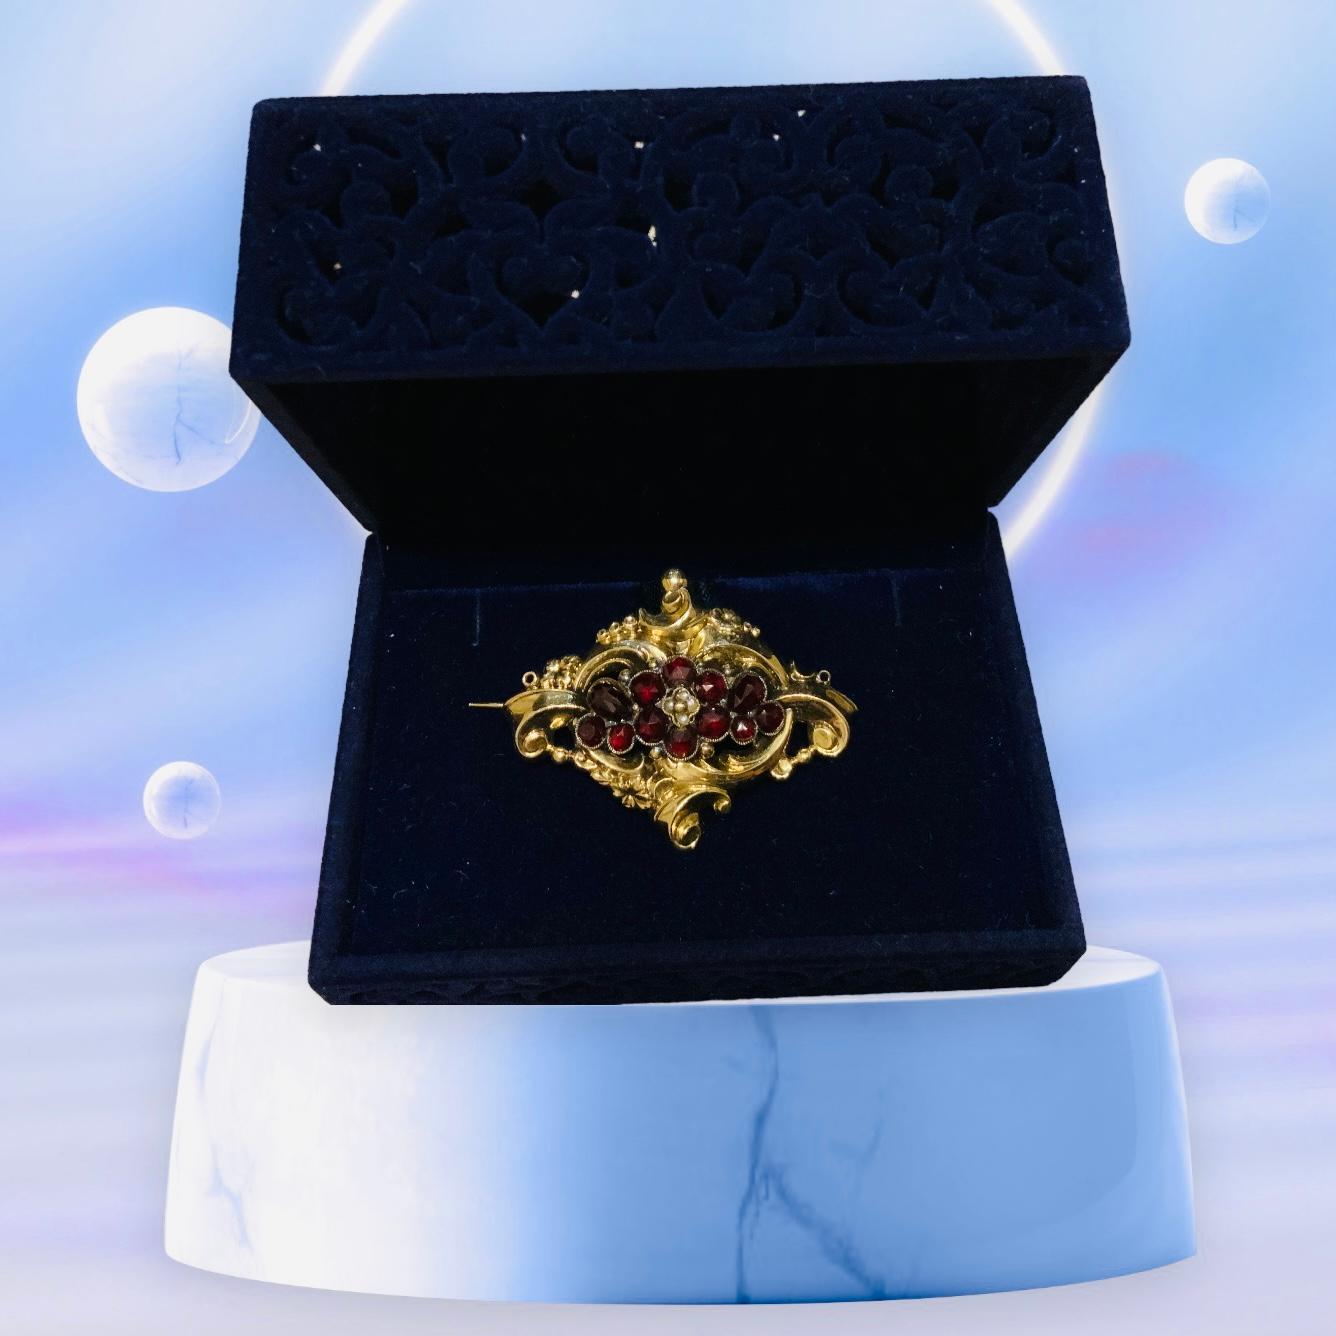 This is a 14K Yellow Gold Rococo Style Brooch. It depicts an oval brooch decorated with twelve old garnets and four seed pearls in the center. It is embellished by a 14K gold frame made of wide short C-scrolls, beads and flowers. Its weight is 2.9